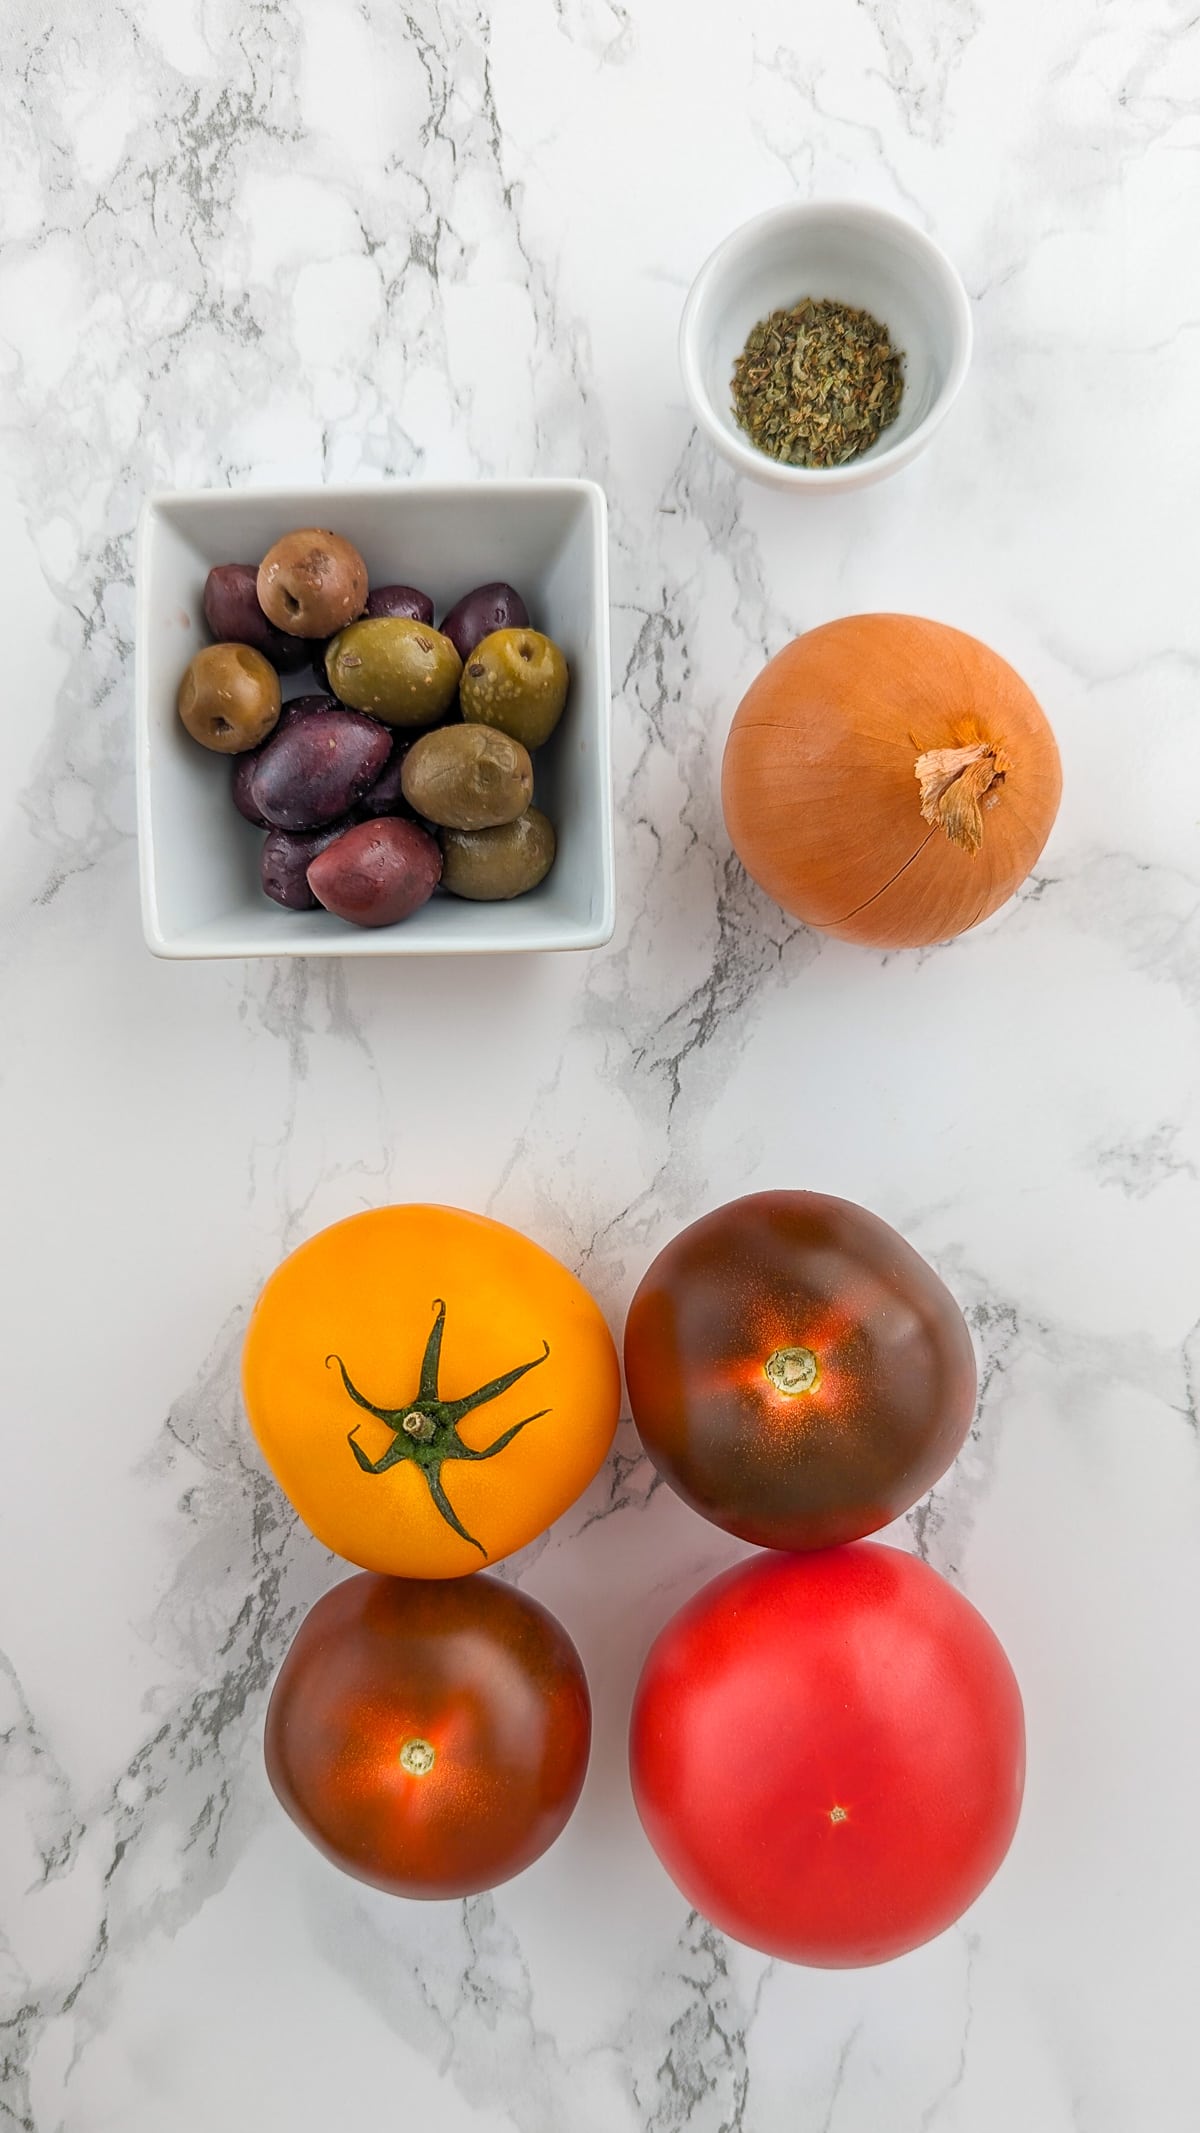 Top view of 4 tomatoes, an onion and olives on a white marble table.